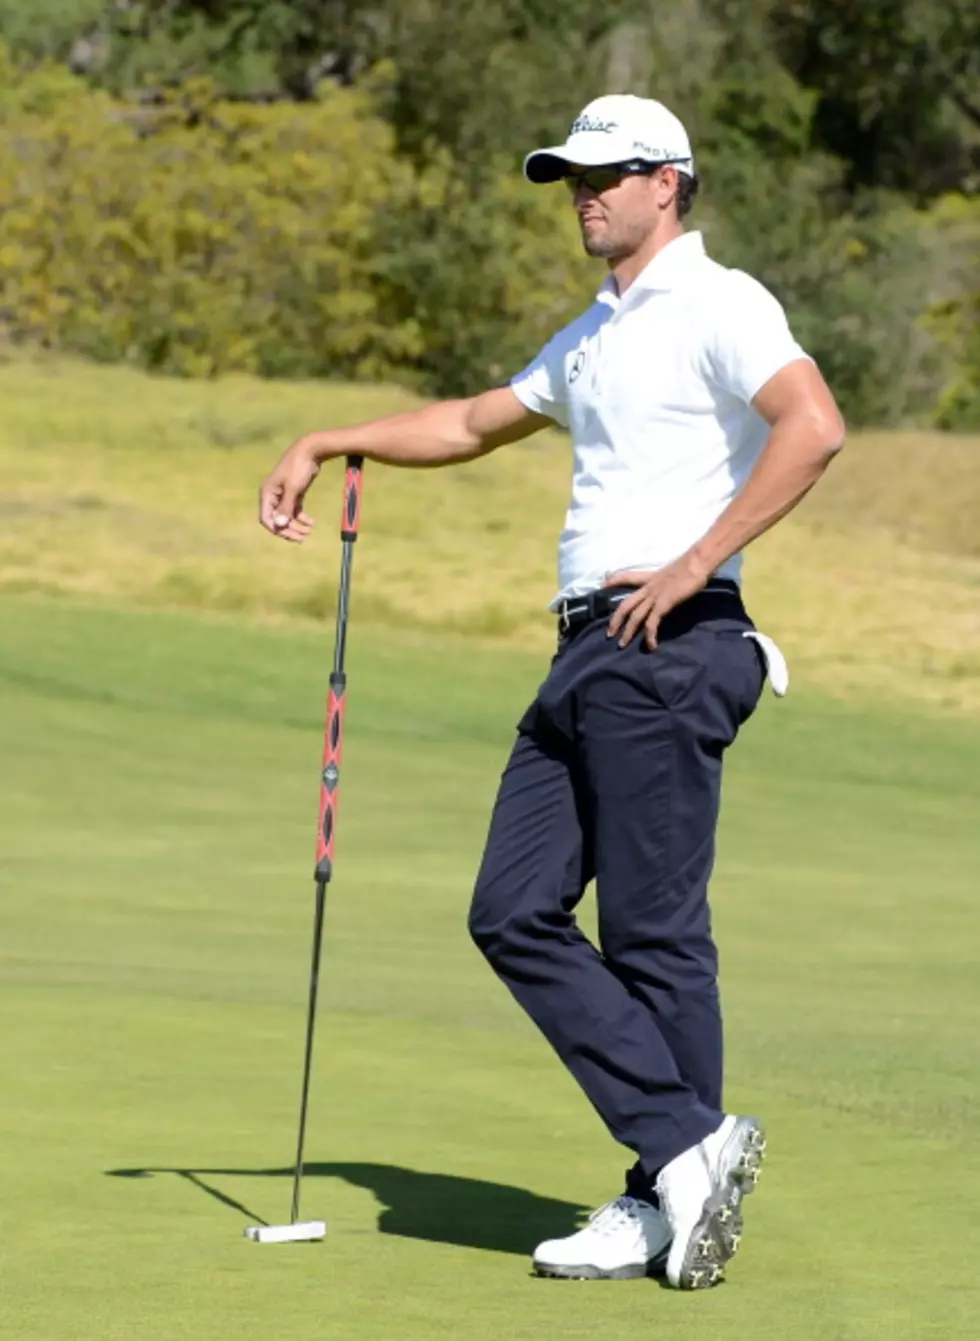 Ban on the Belly Putter